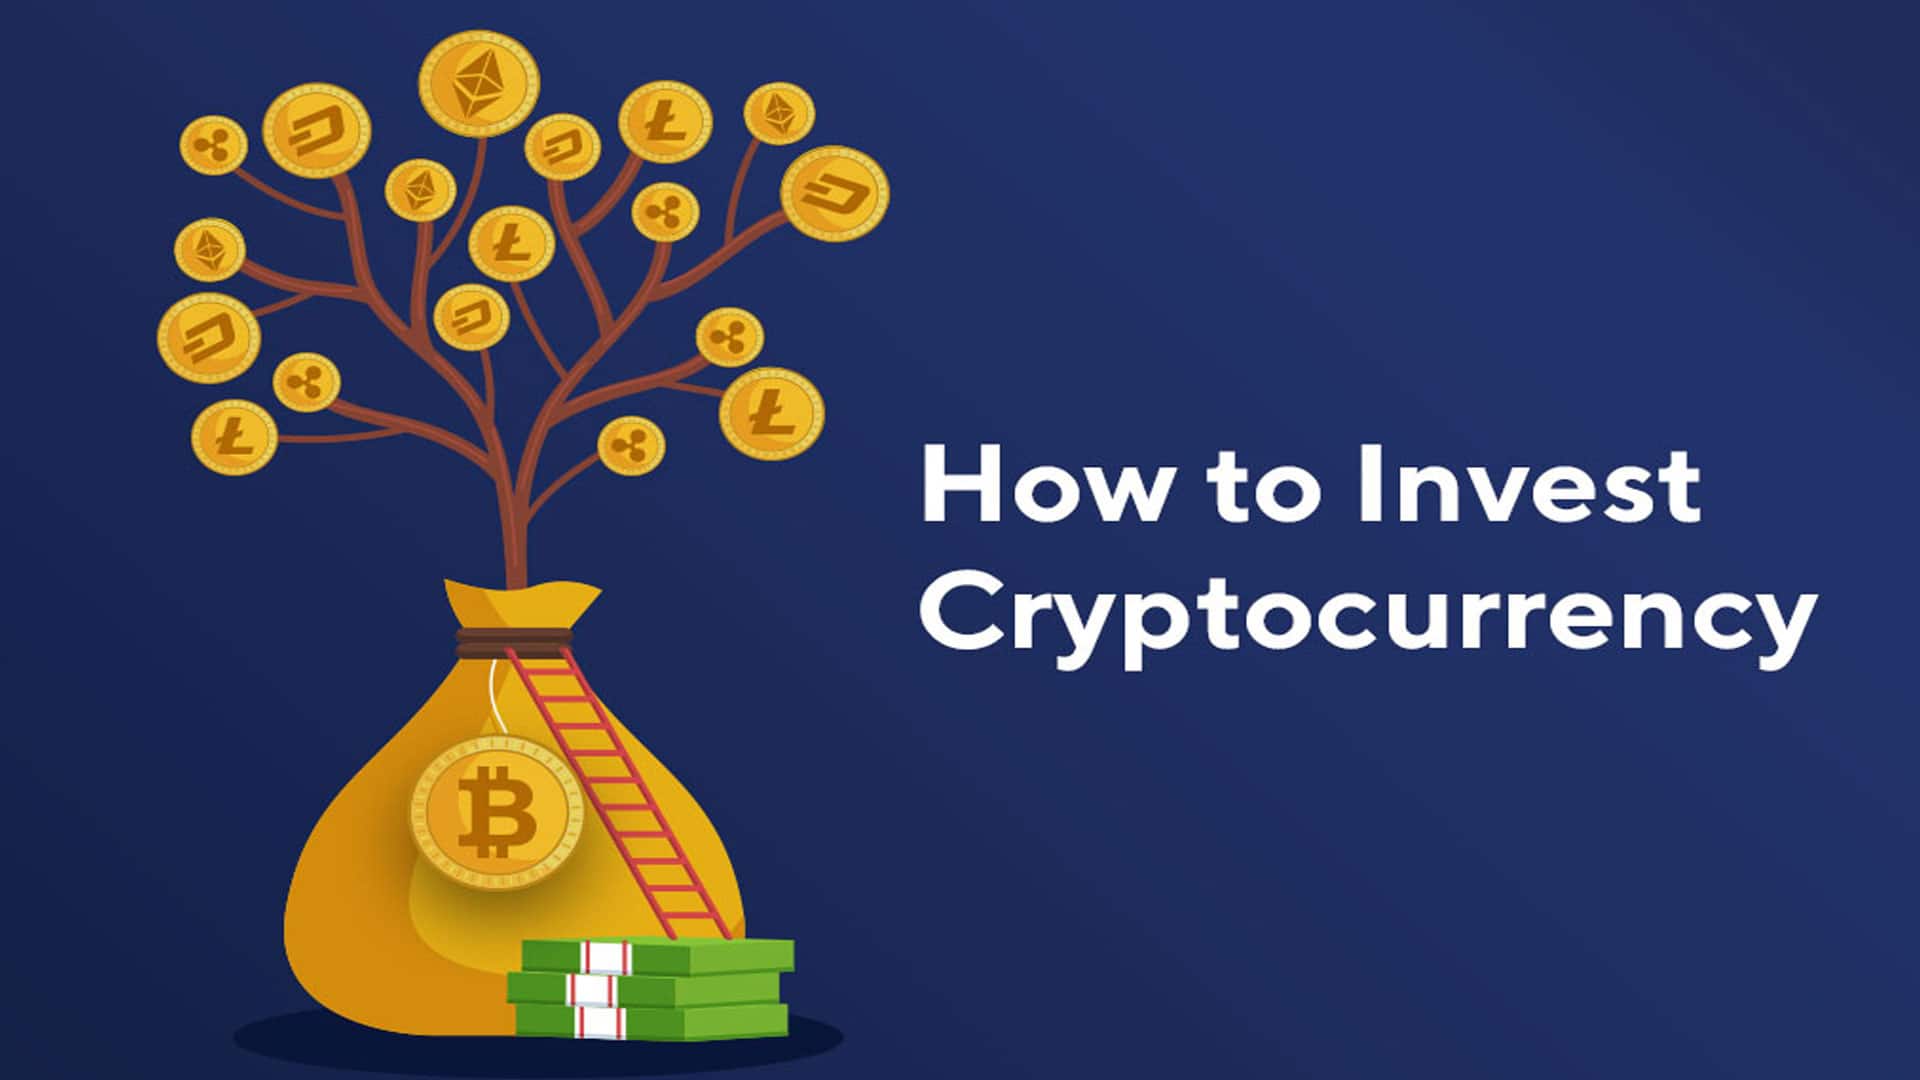 How To Invest in Cryptocurrencies